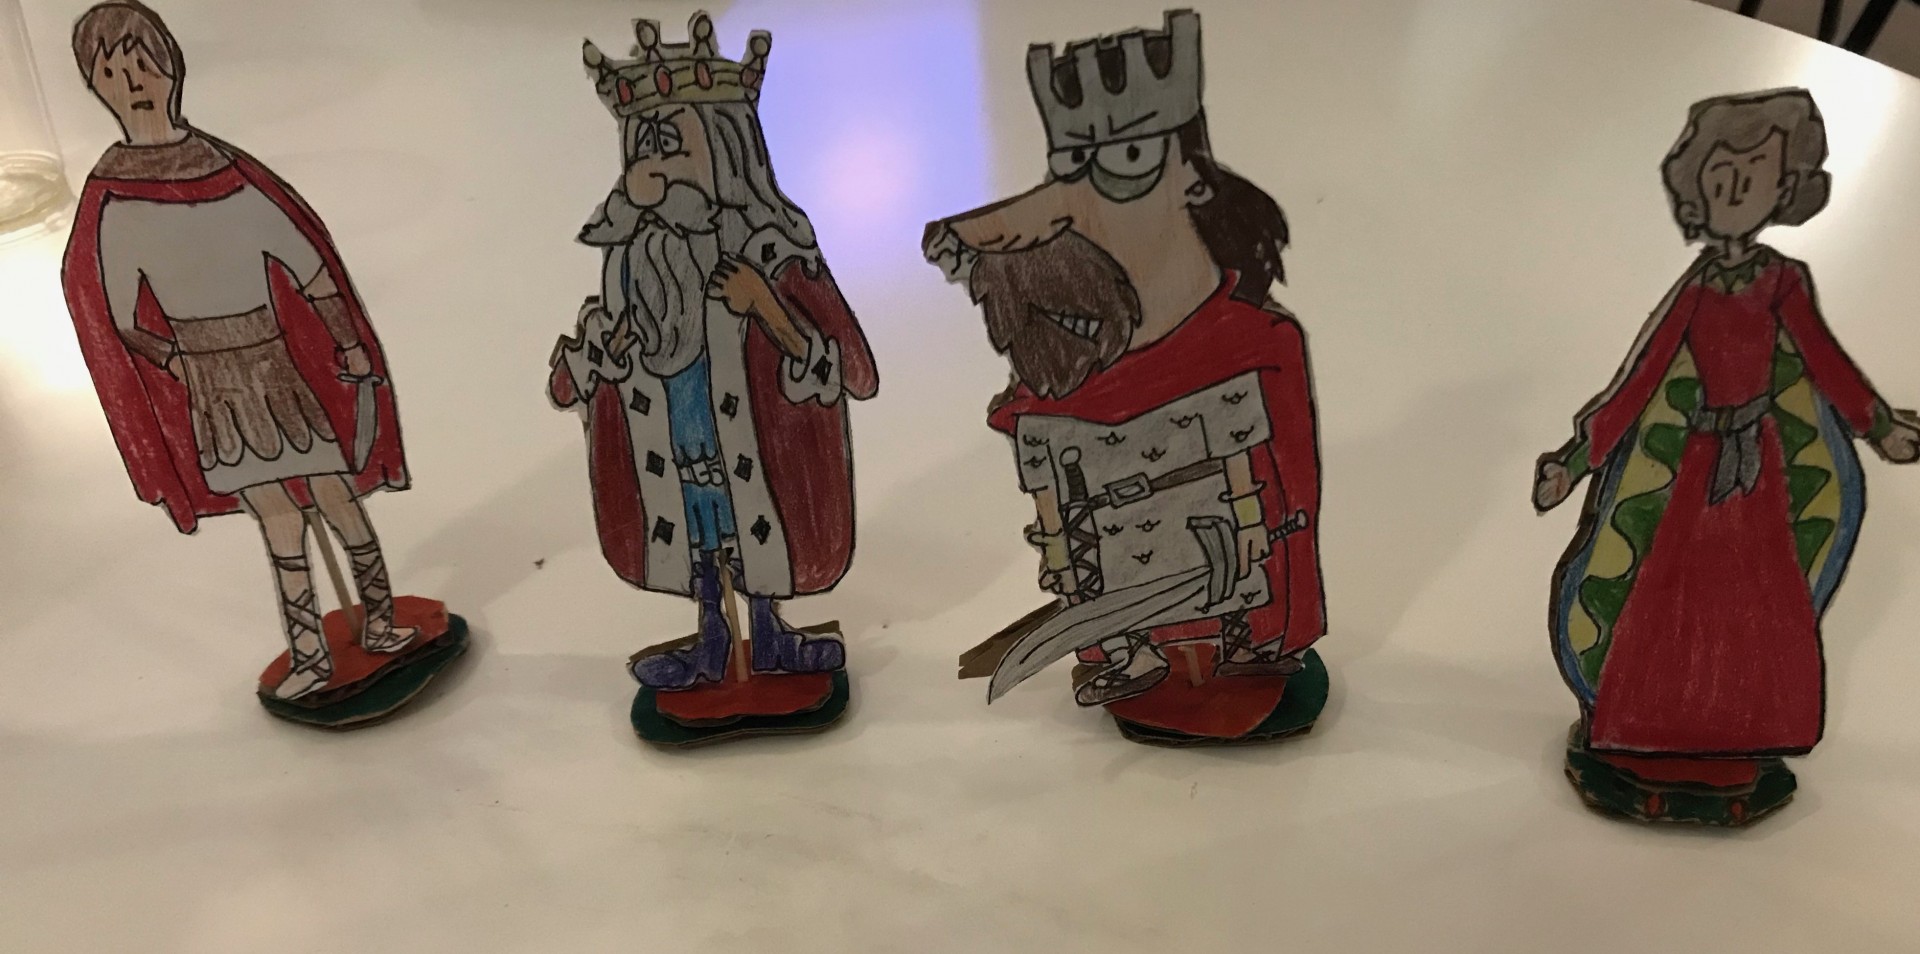 Our game pieces, credit to Margie for making them!! (from left to right: Banquo, King Duncan, Macbeth, Lady Macbeth)